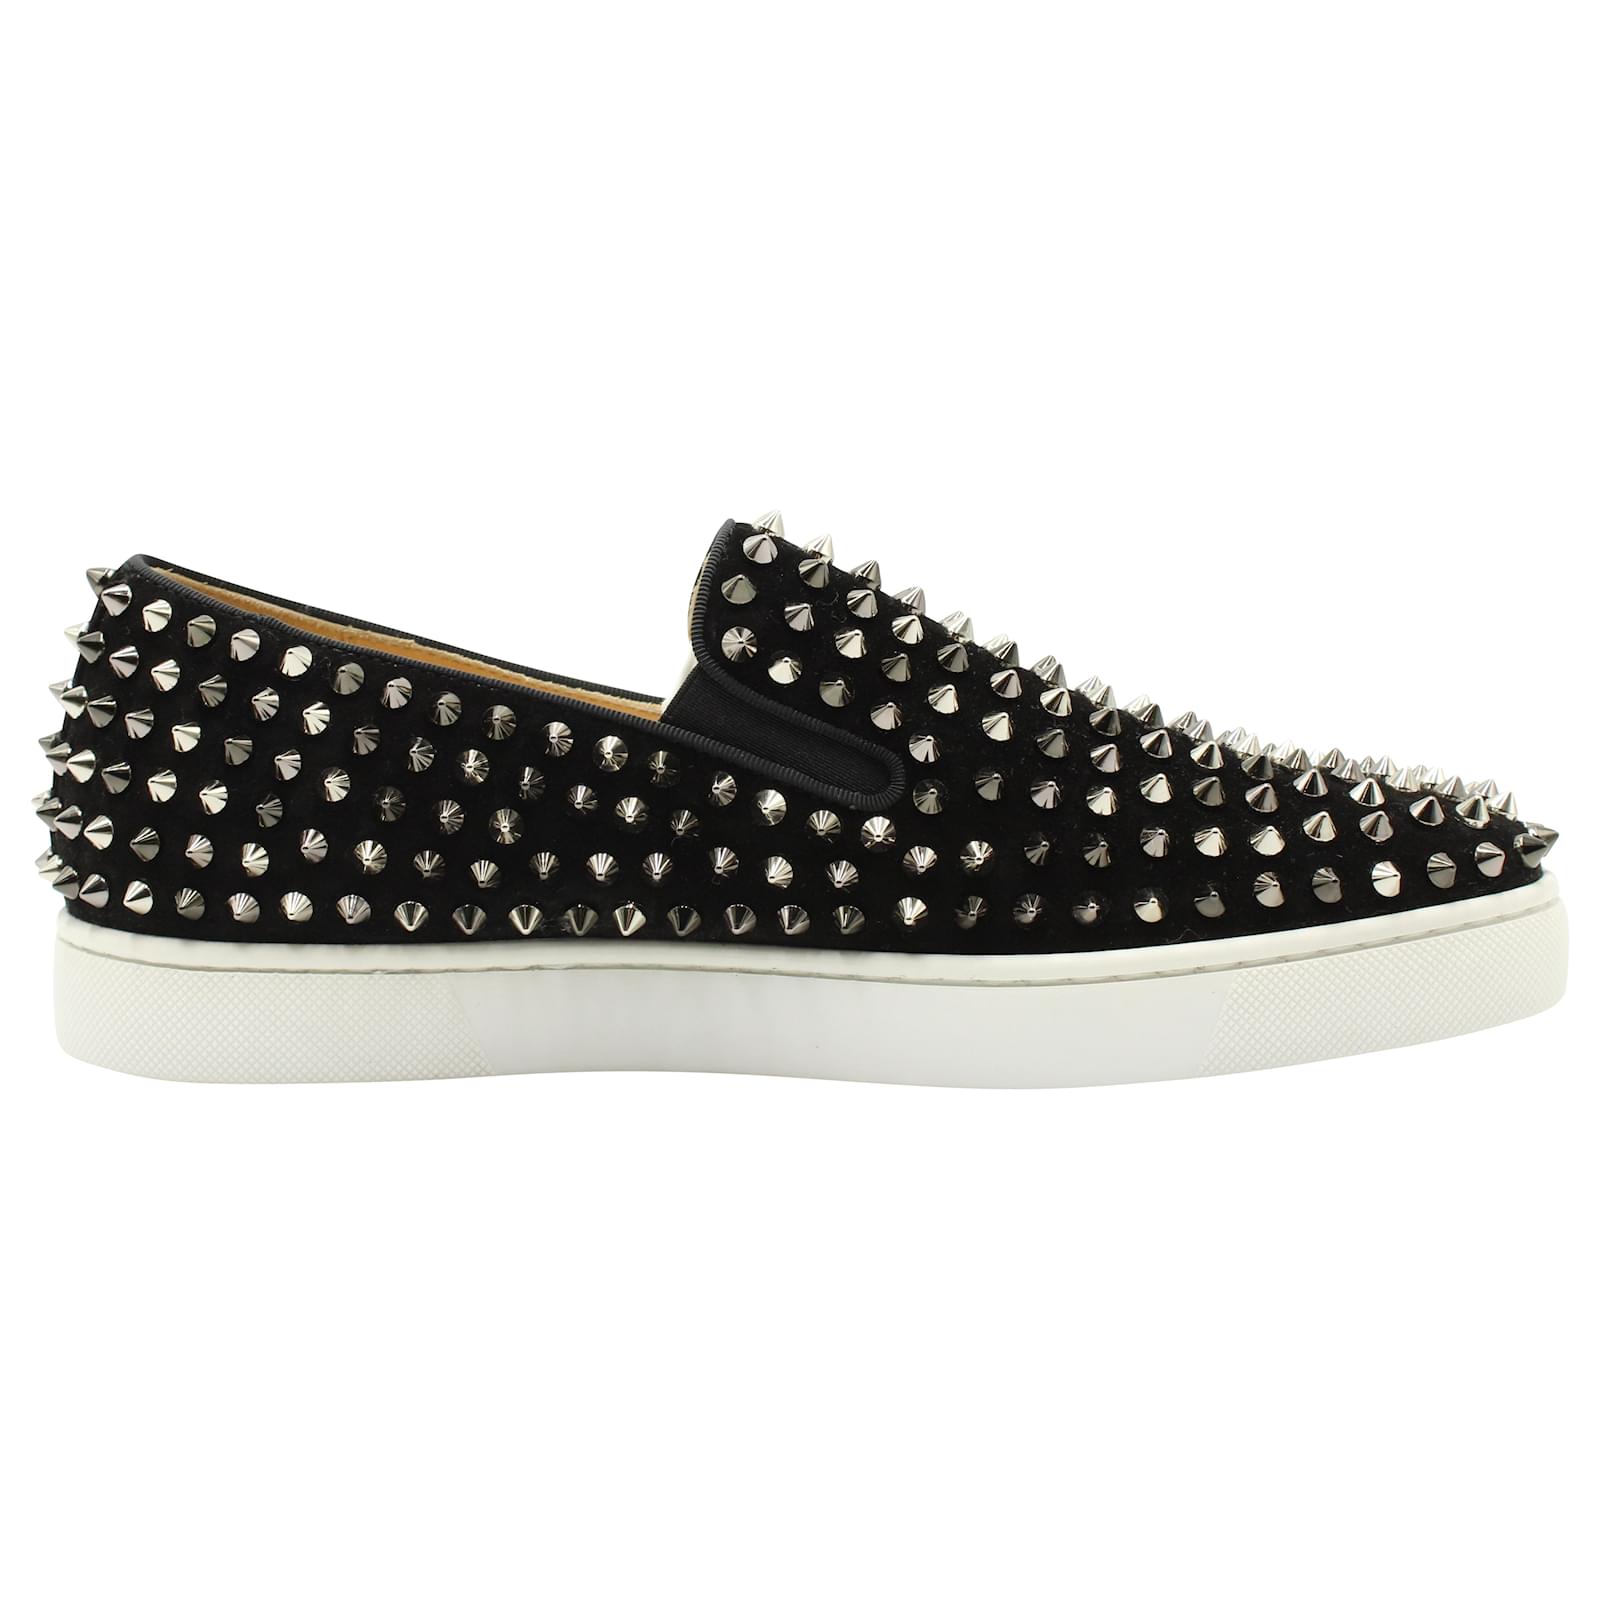 Christian Louboutin Roller-boat Spiked Flat Sneakers in Black Suede